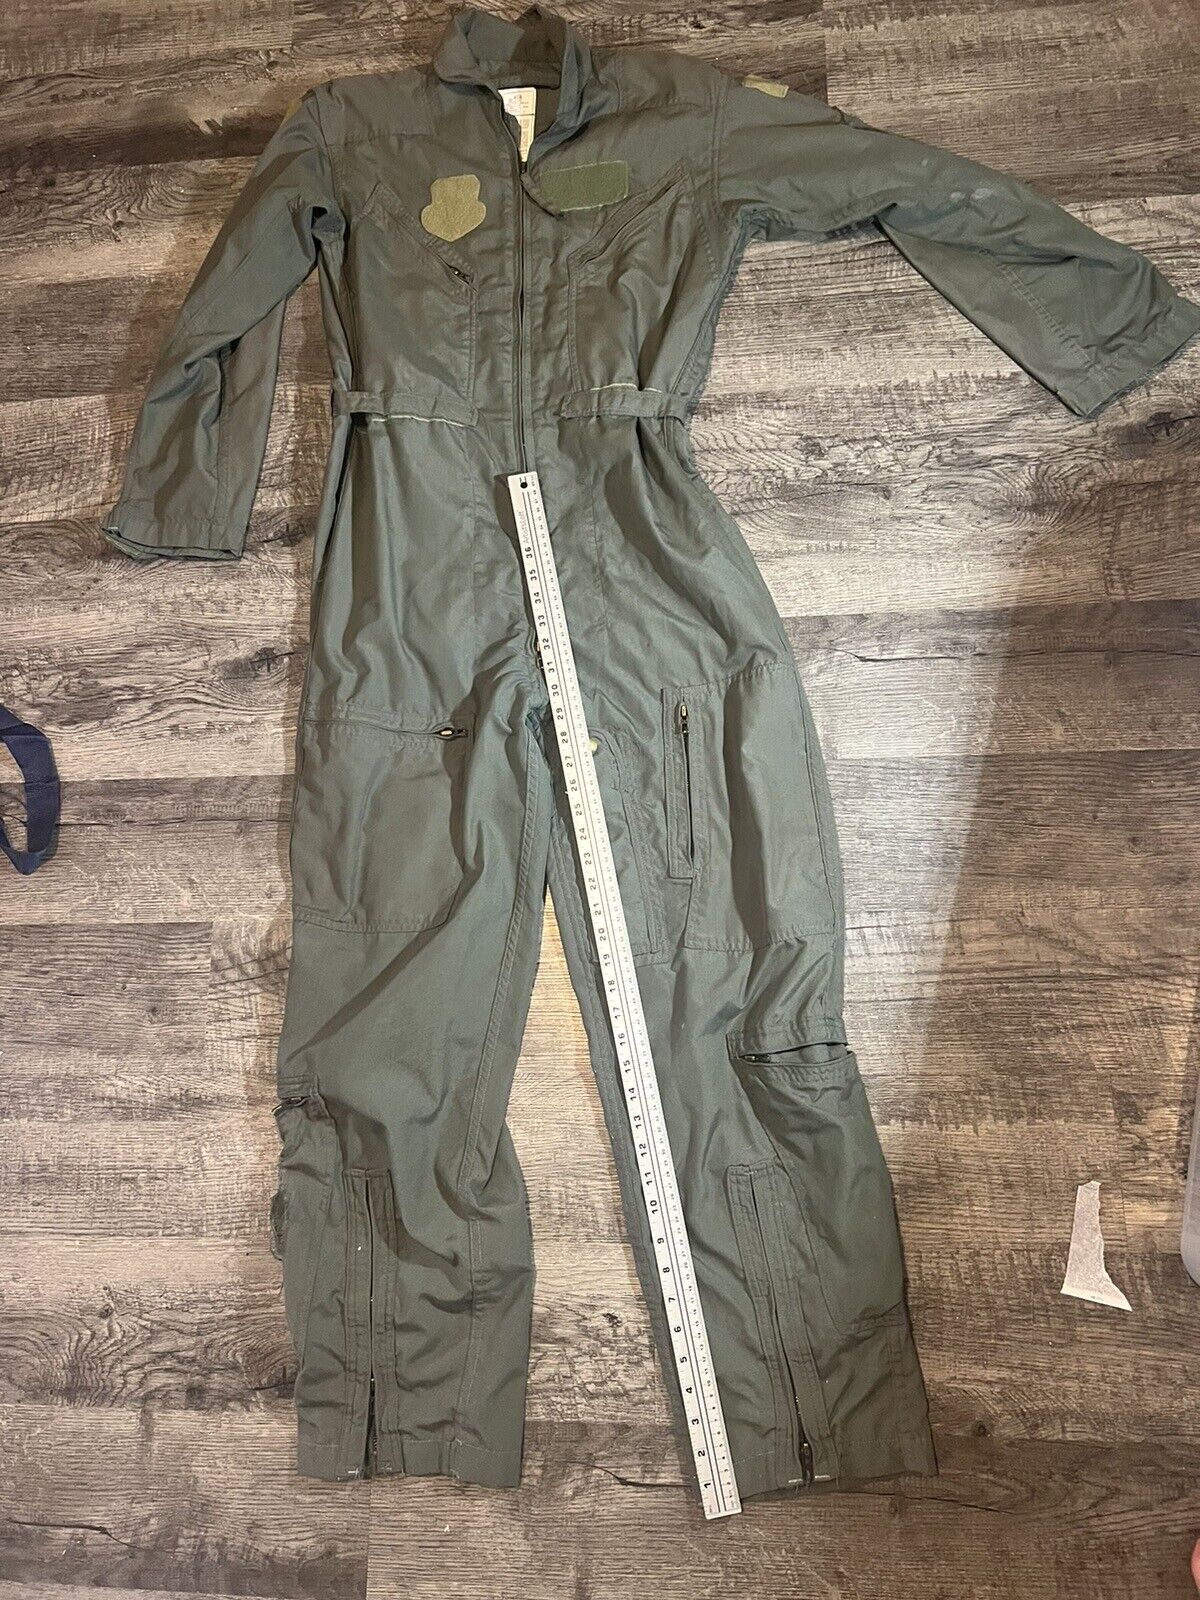 40R CWU-27/P Pilot Flyers Coveralls FLIGHT Suit Sage Green  Military Navy USAF